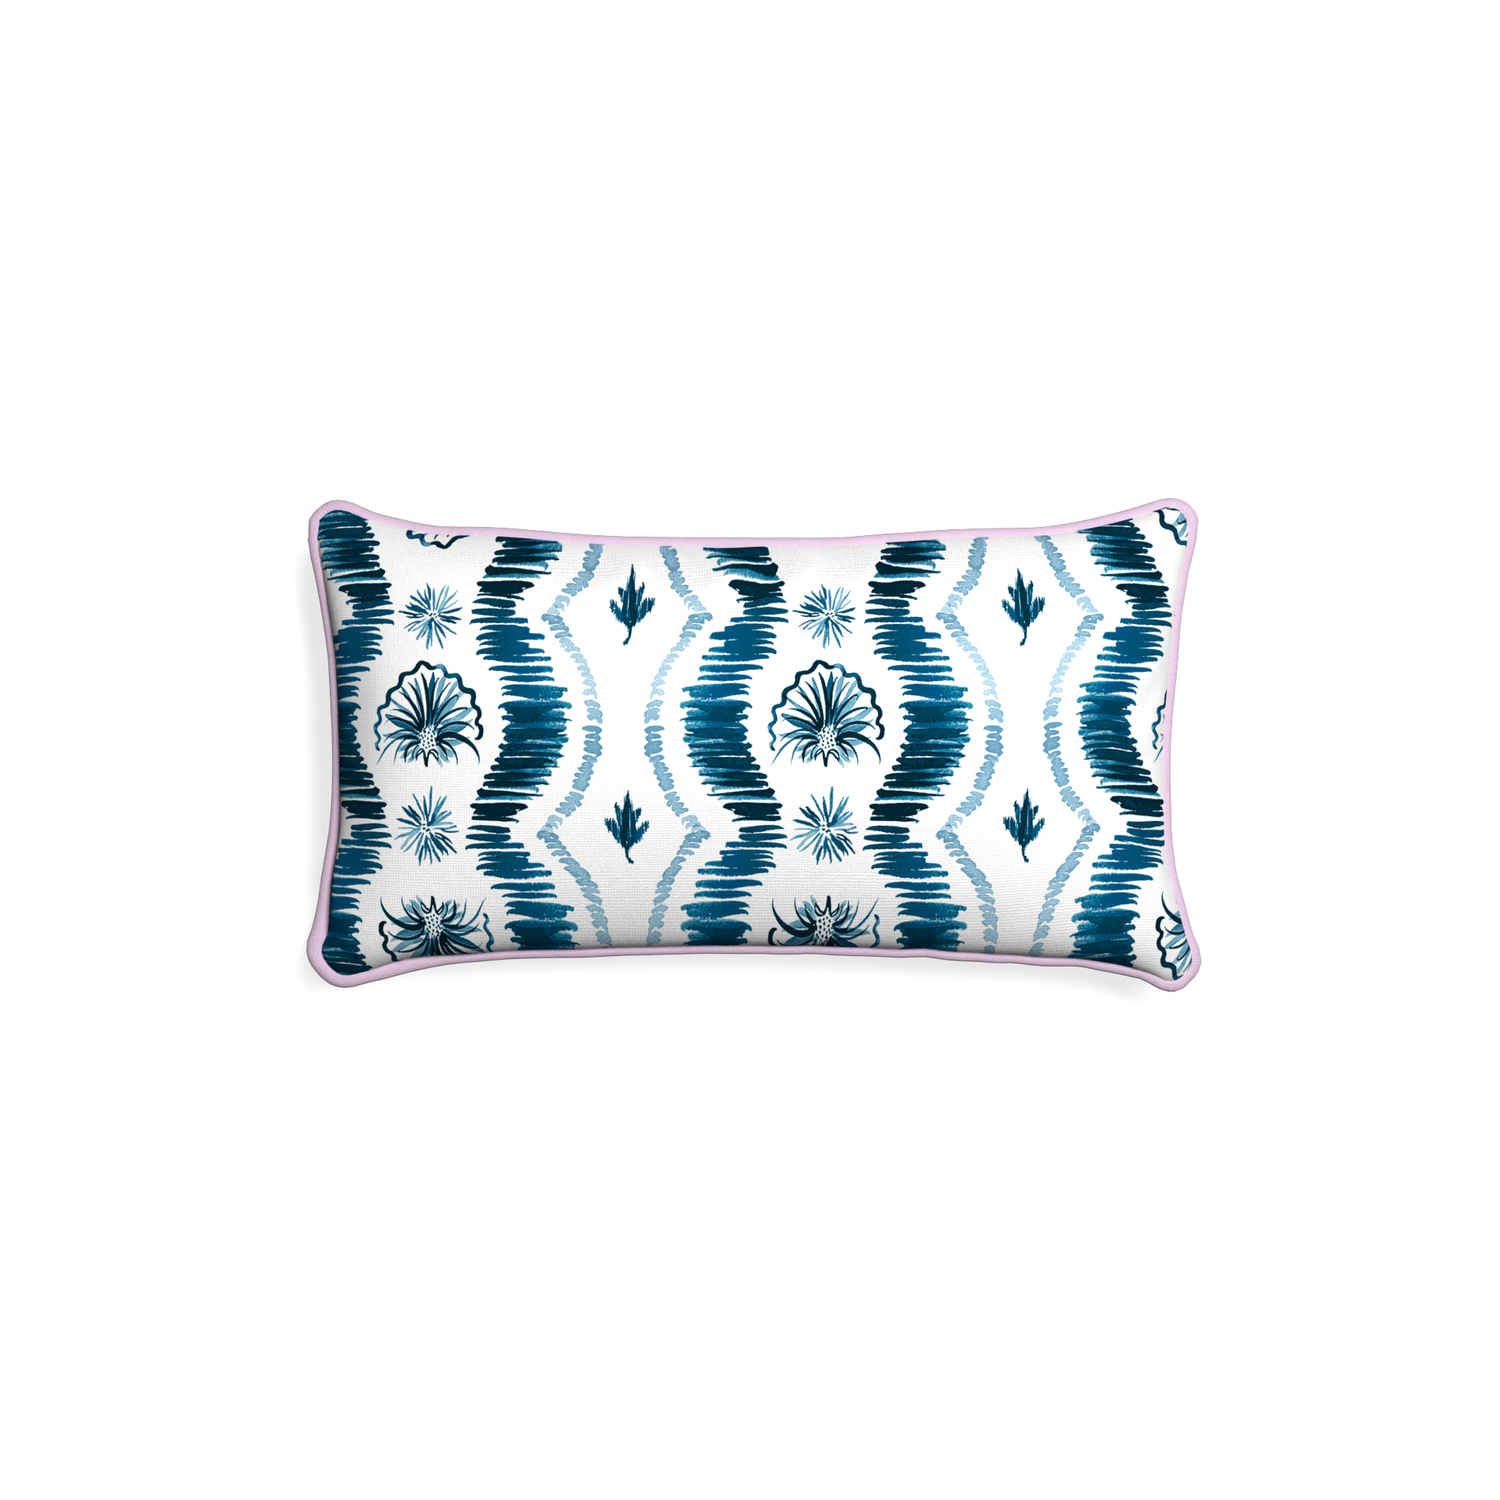 Petite-lumbar alice custom blue ikatpillow with l piping on white background